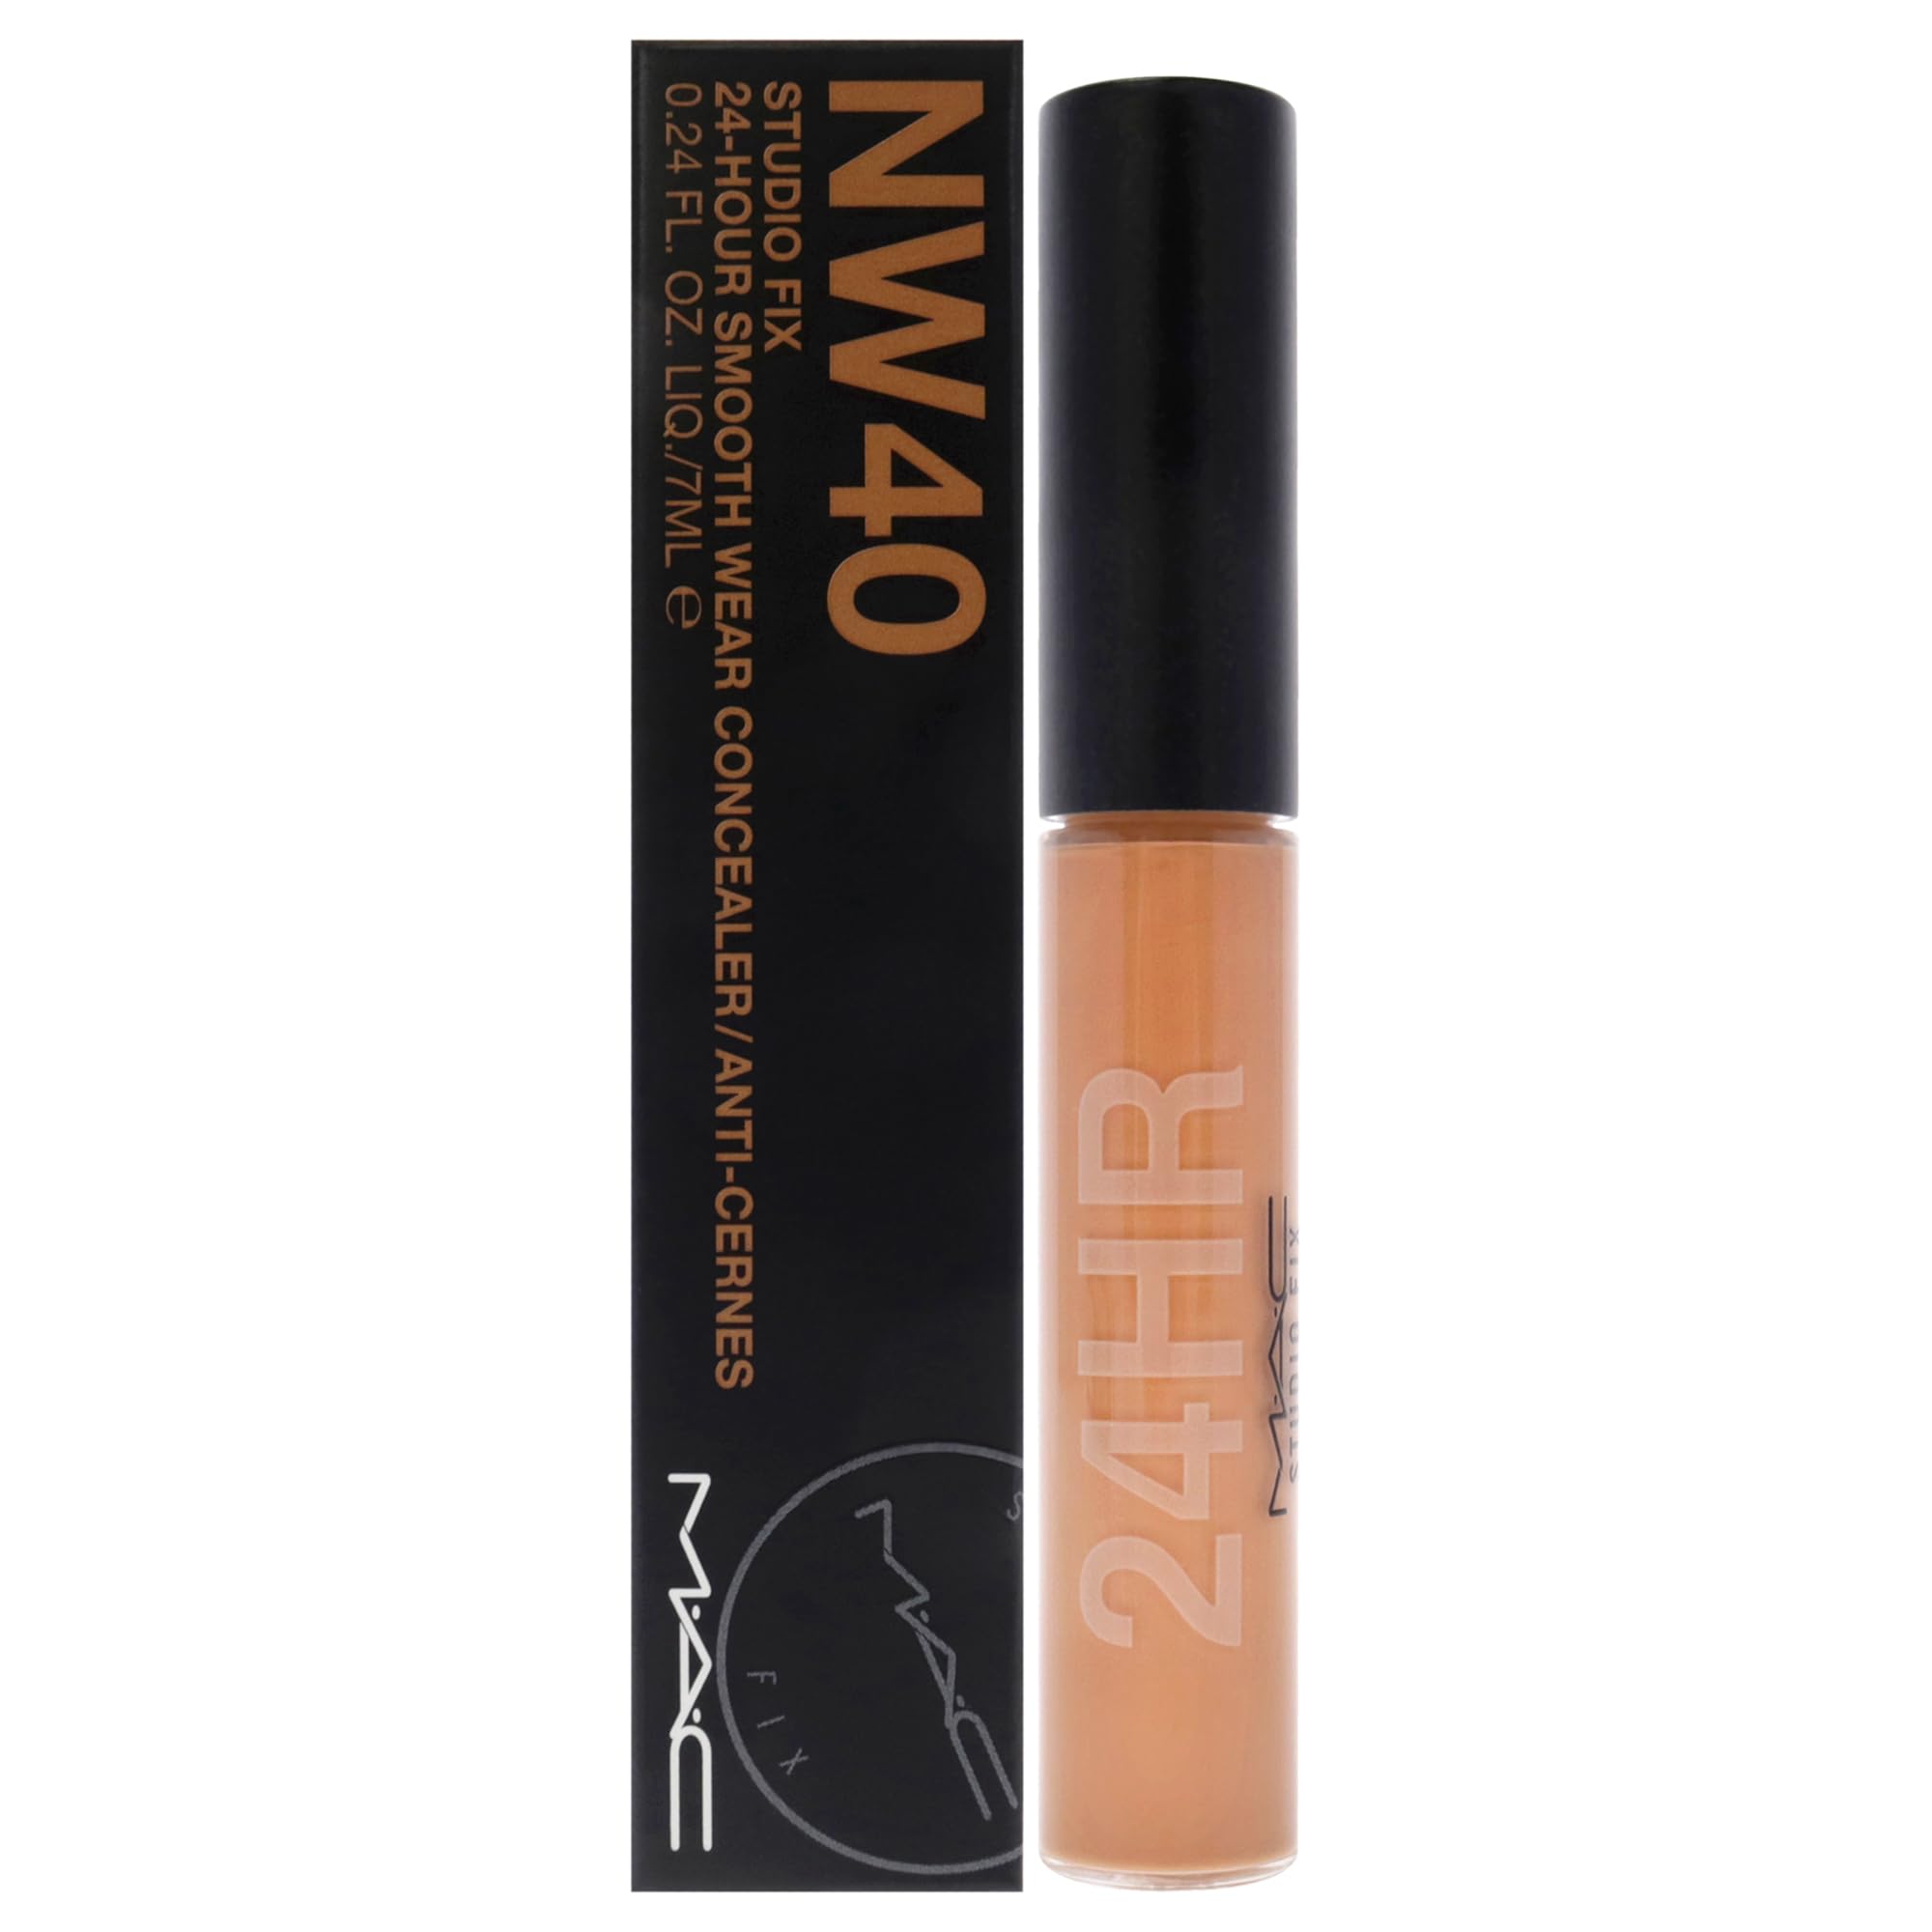 Studio Fix 24-Hour Smooth Wear Concealer - NW40 by MAC for Women - 0.24 oz Concealer